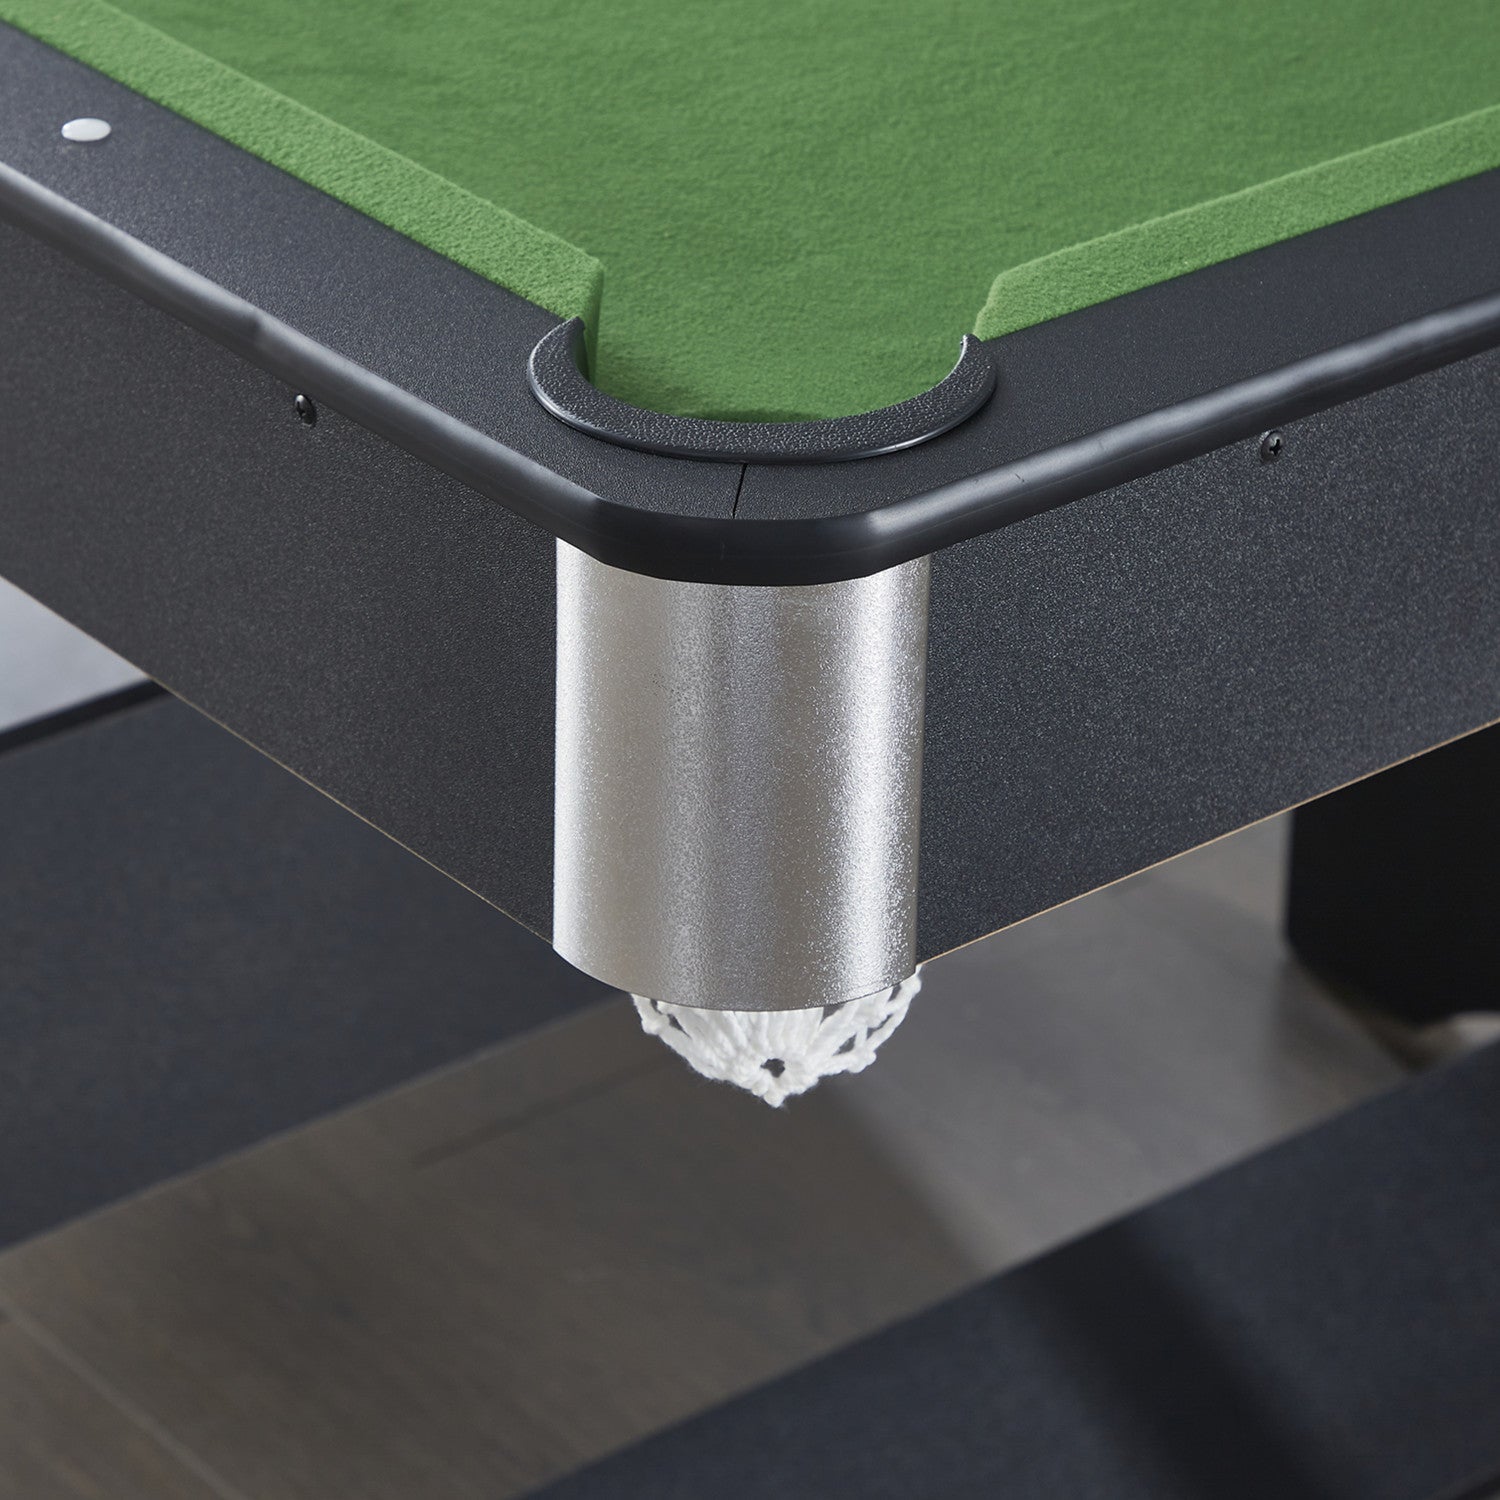 Lyle 6FT Pool Table- 3IN1 Foldable Black